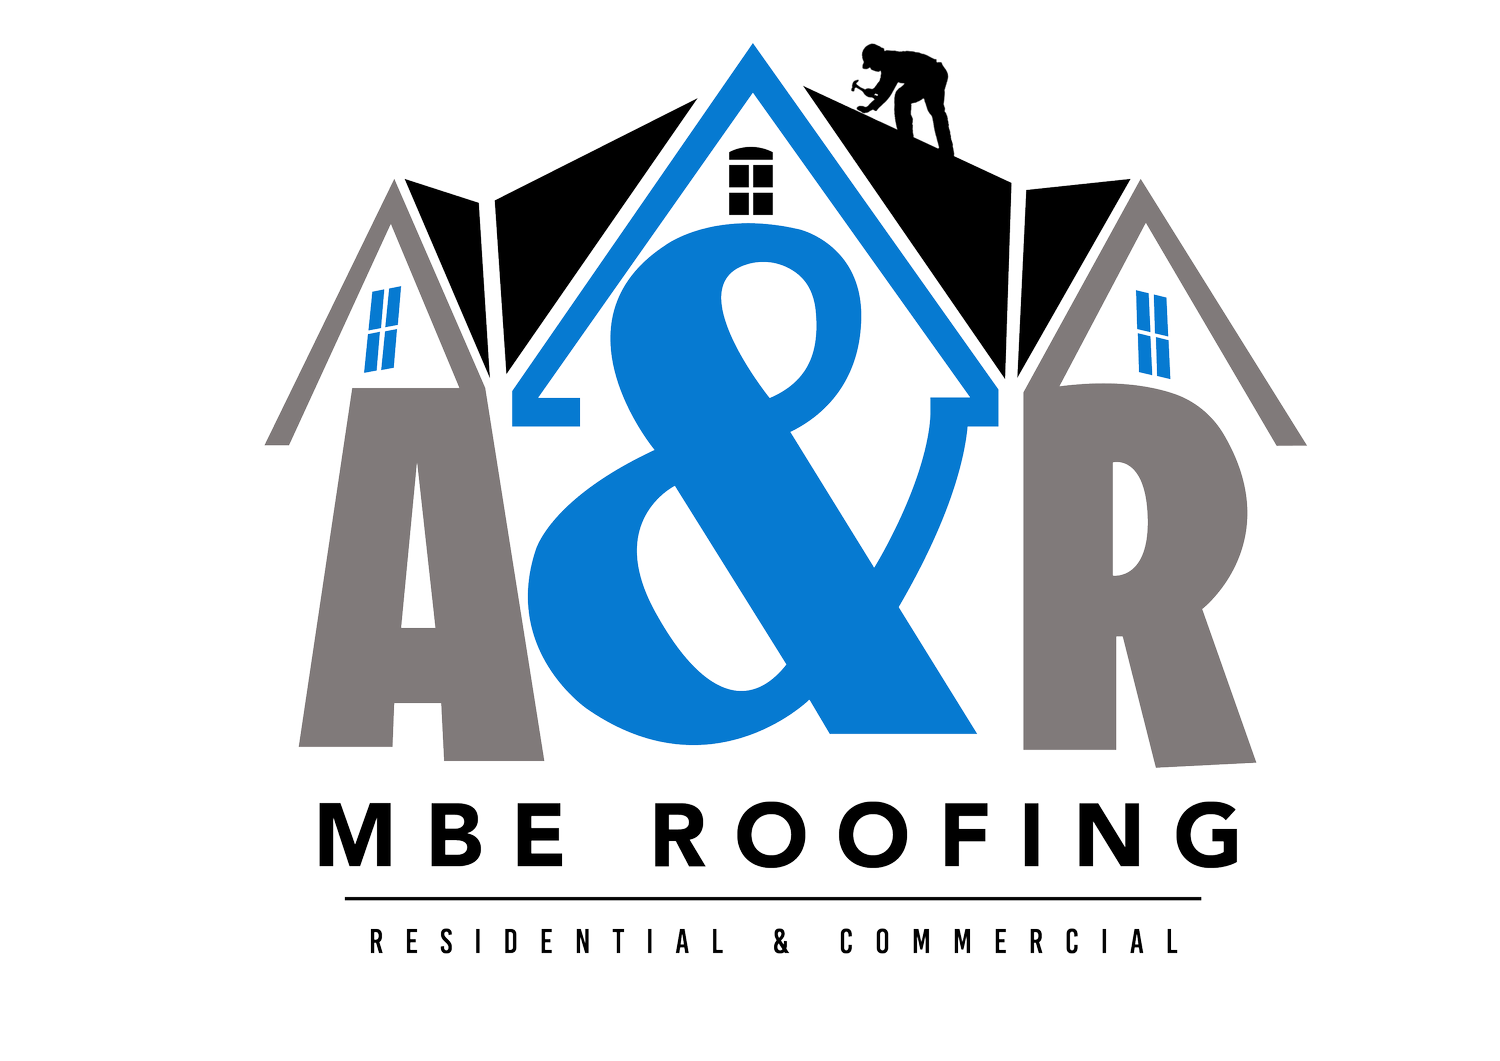 A&amp;R MBE Roofing Contractors